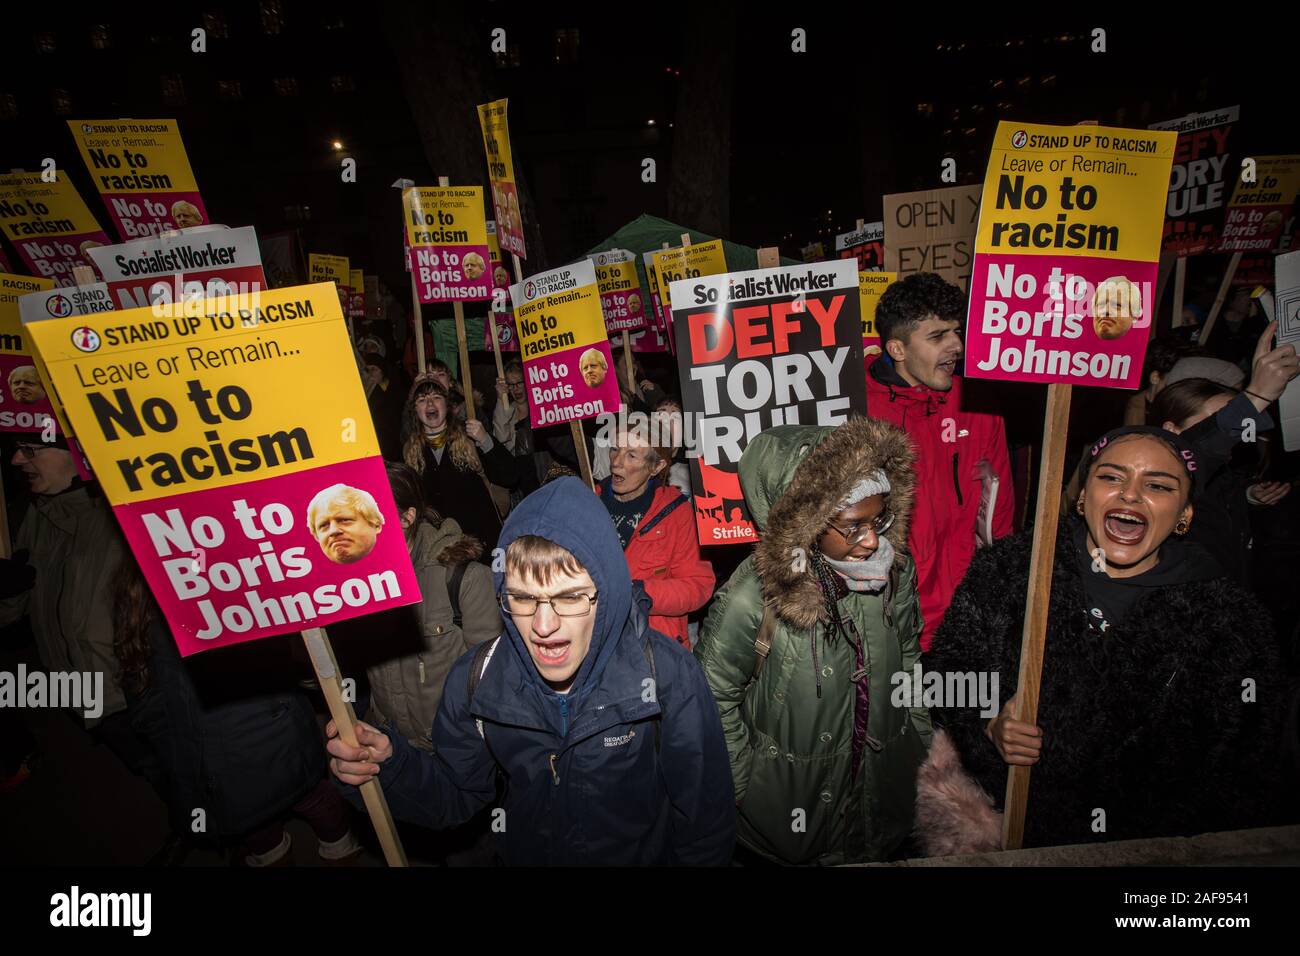 London, UK. 13 December, 2019. Hundreds of anti-racism protesters gathered on Whitehall to demonstrate against the new Boris Johnson government. David Rowe/Alamy Live News Stock Photo